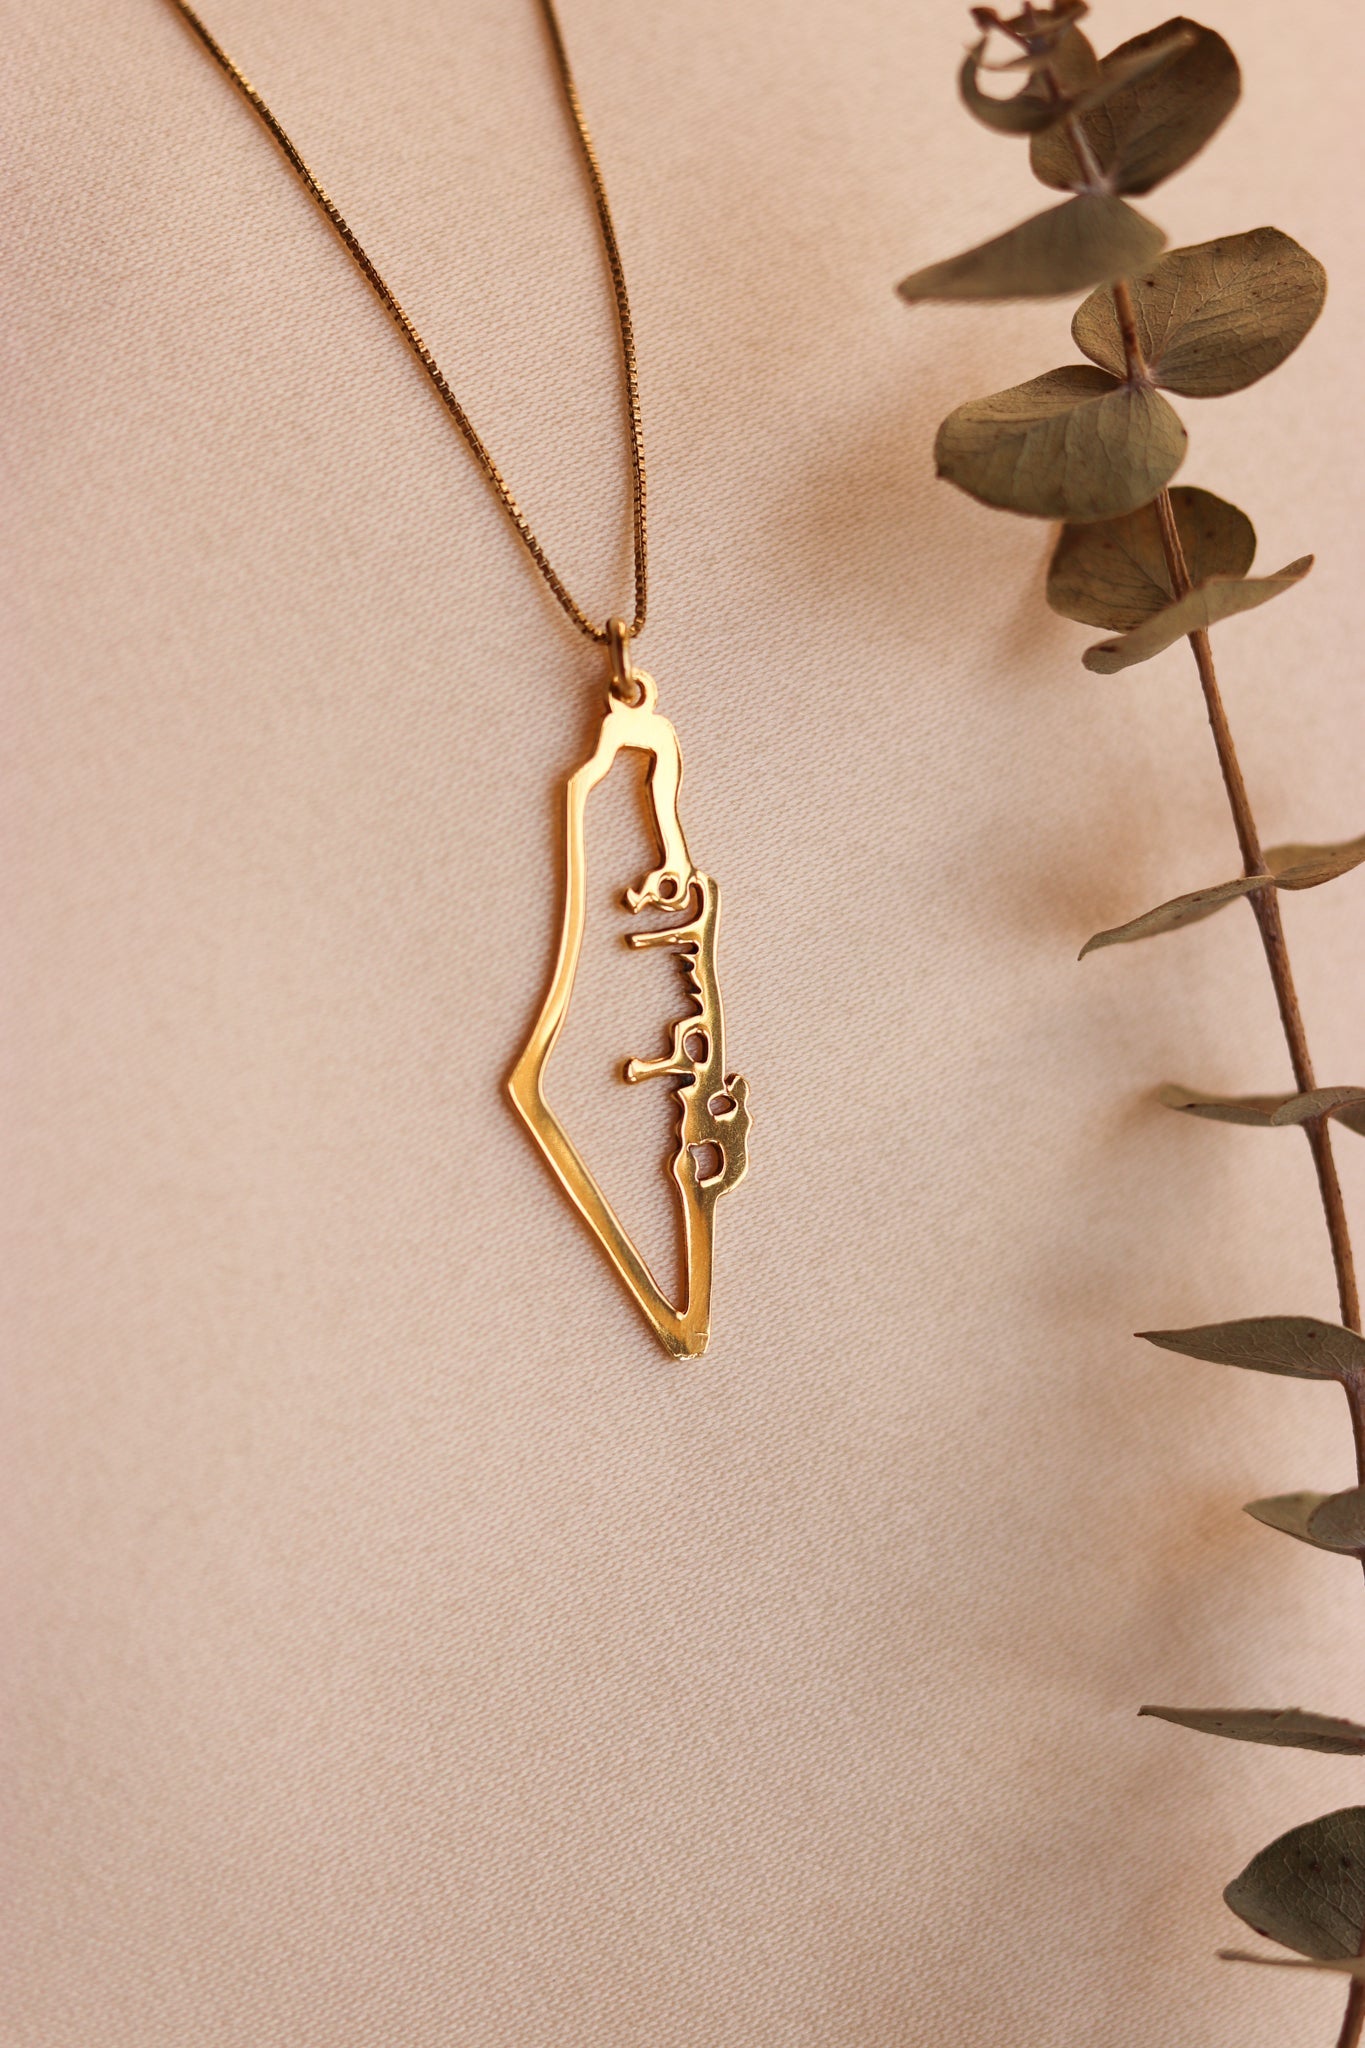 Palestine map with vertical Palestine Arabic word necklace